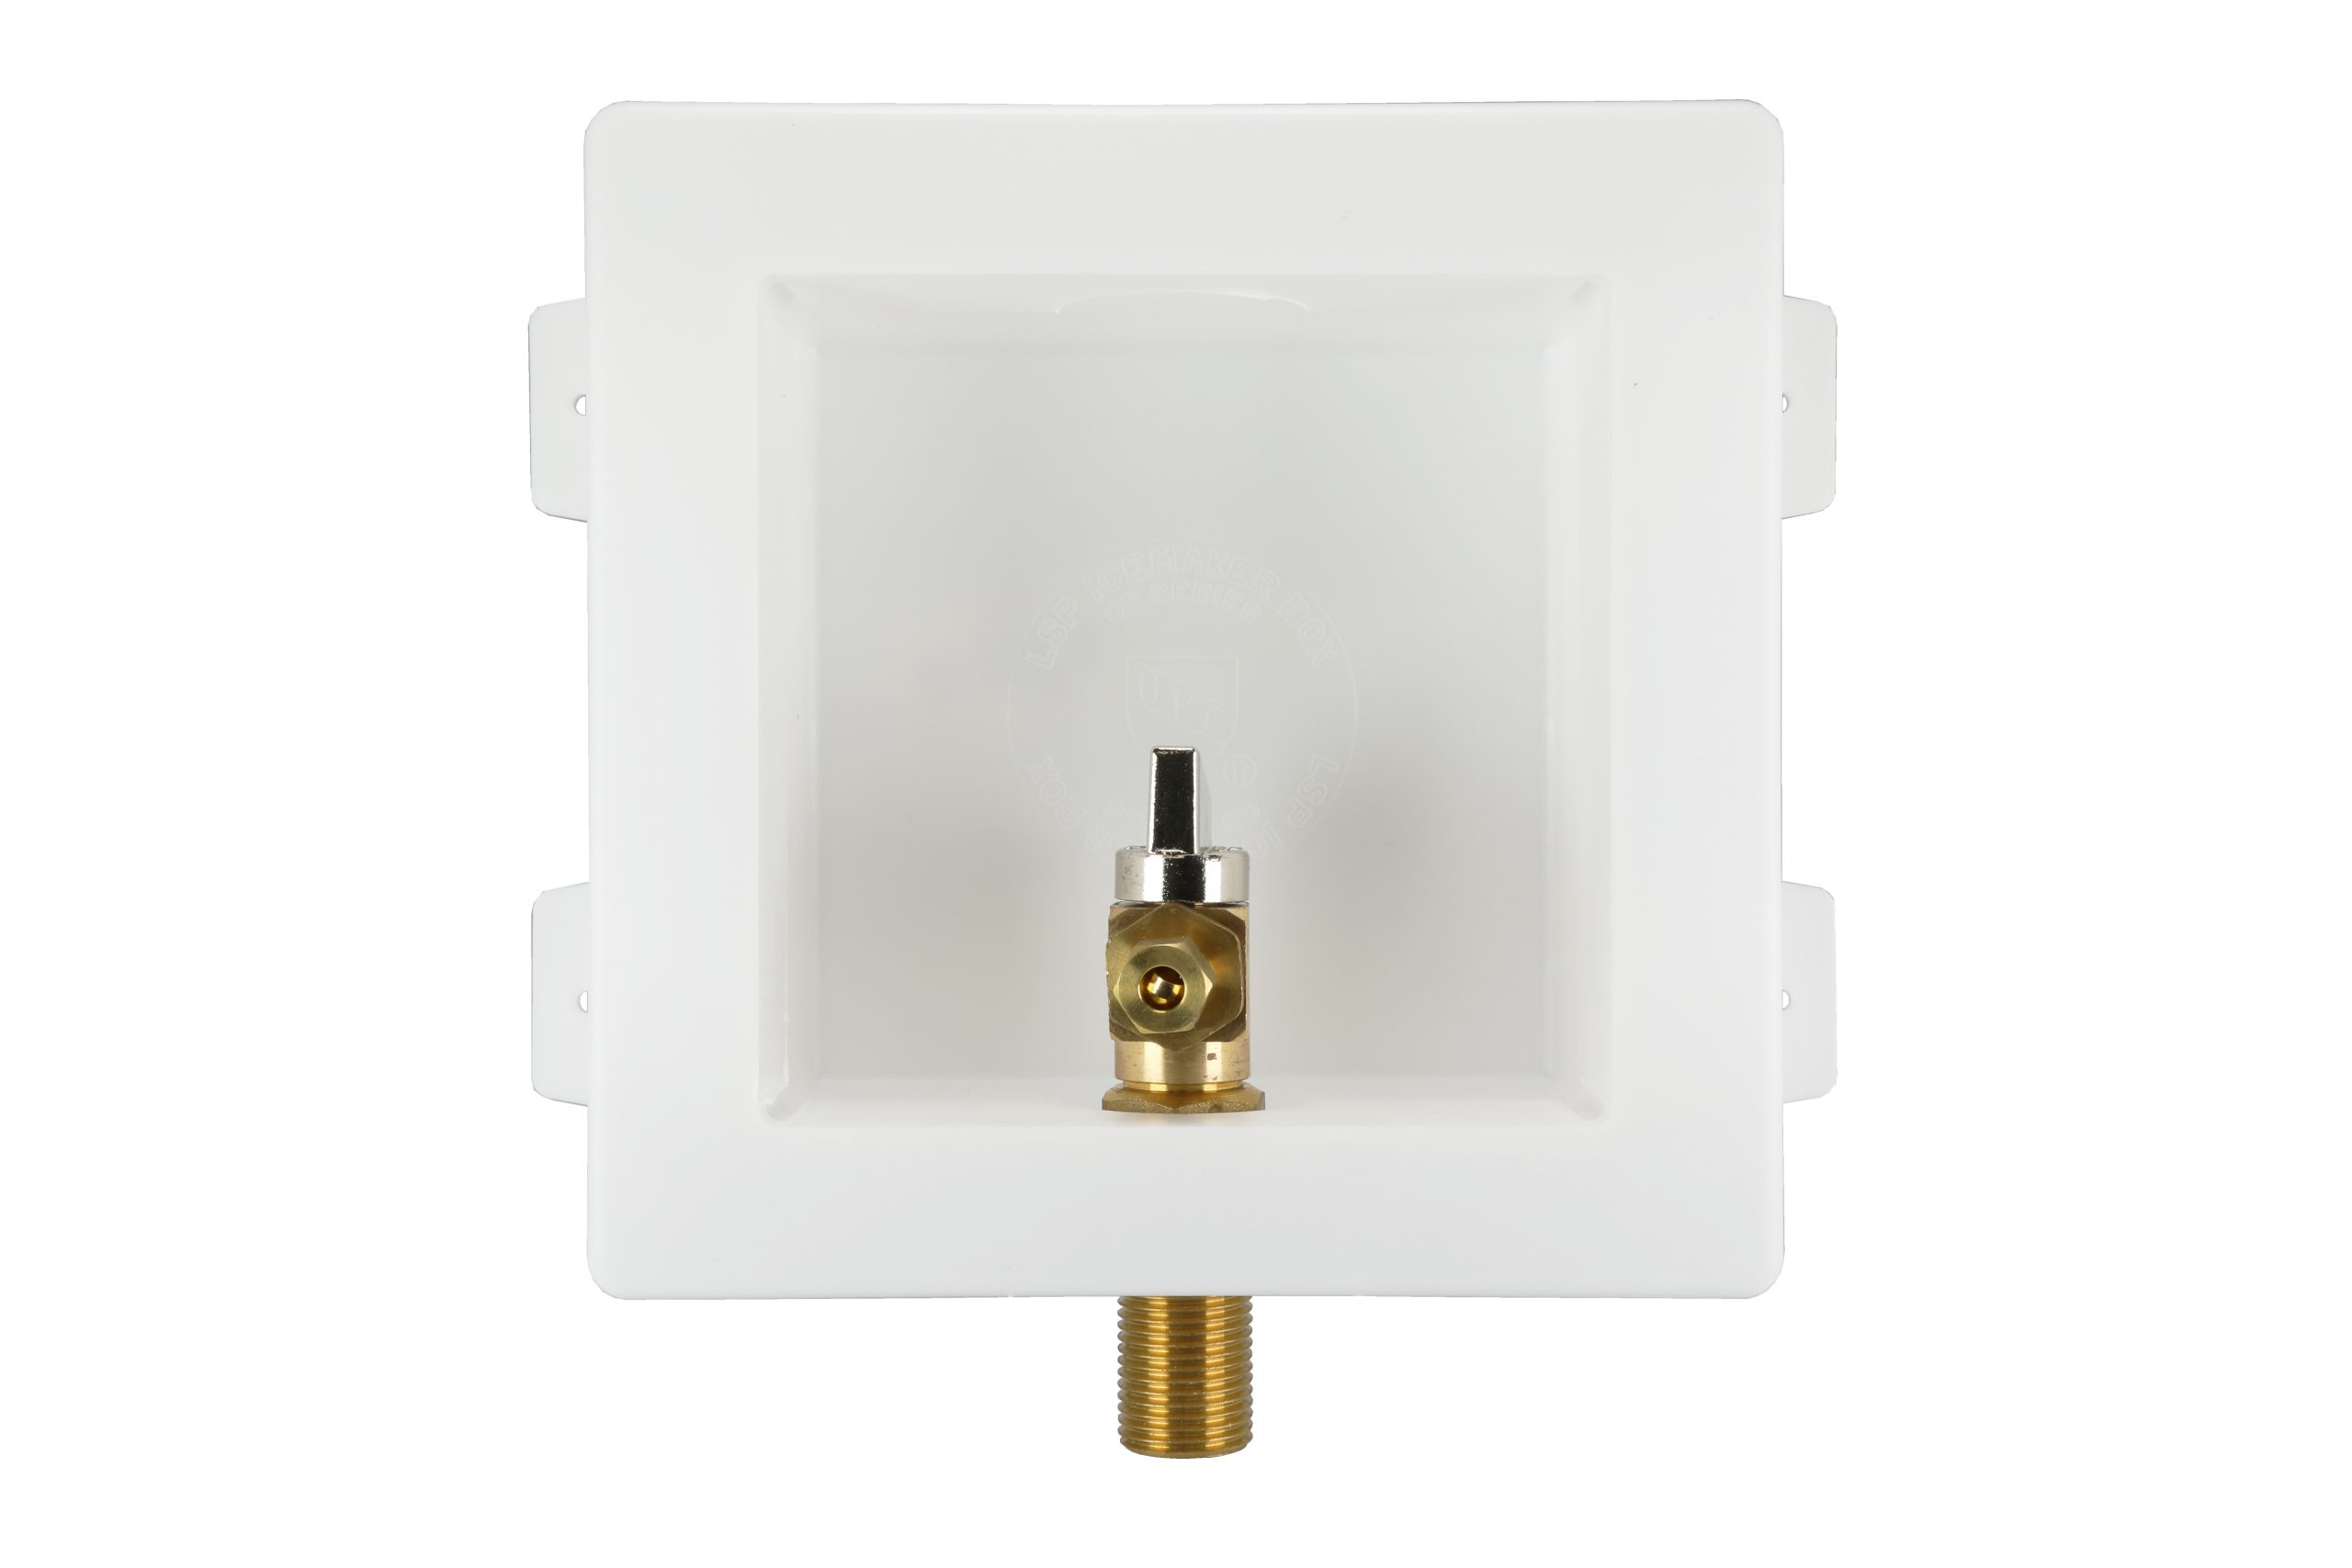 Ice Maker Outlet Box with Valve